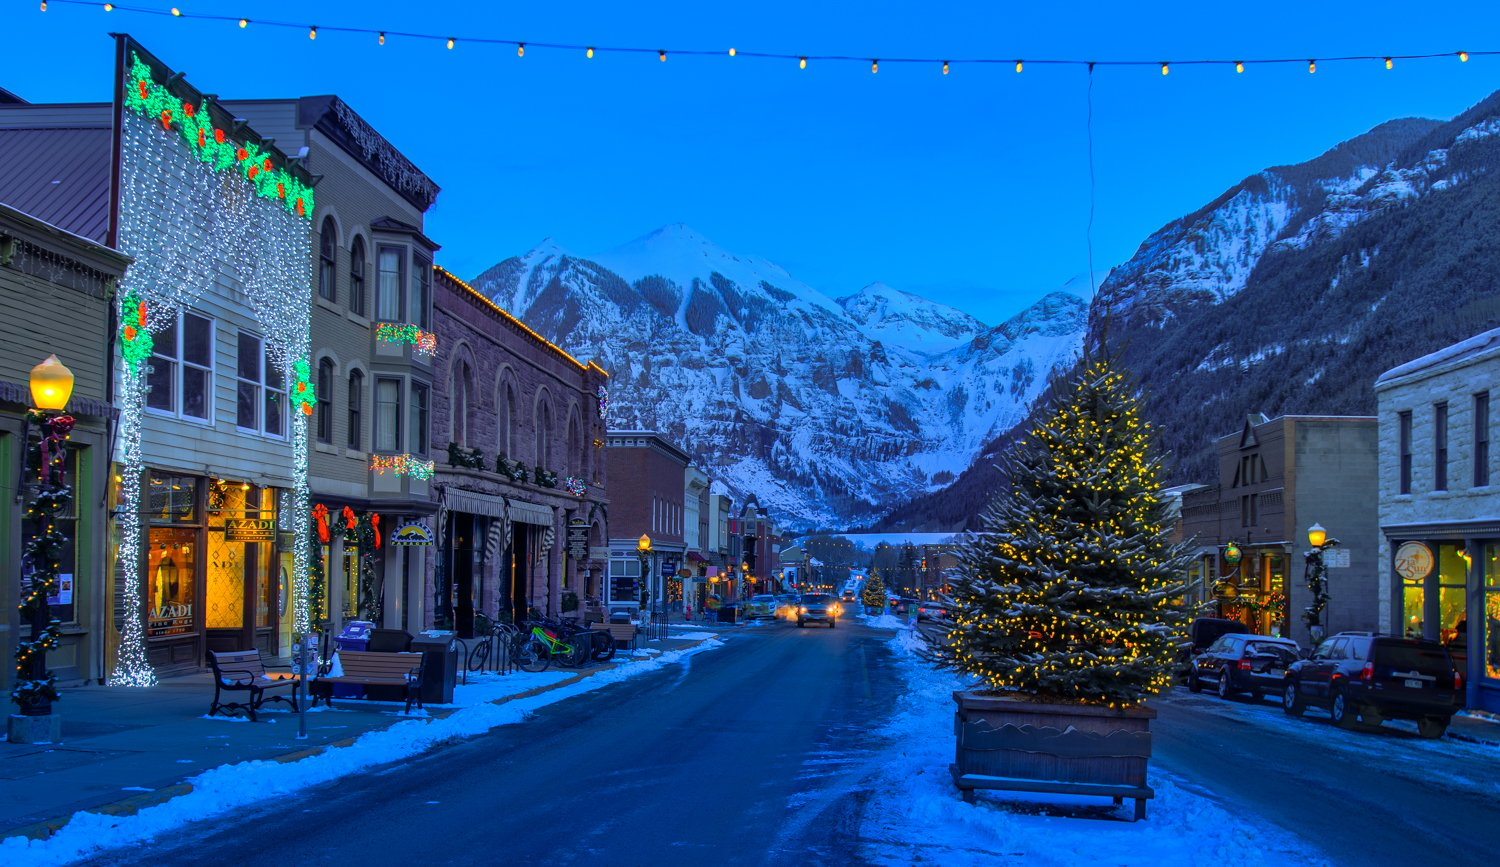 View of Main Street in Telluride with Christmas Lights